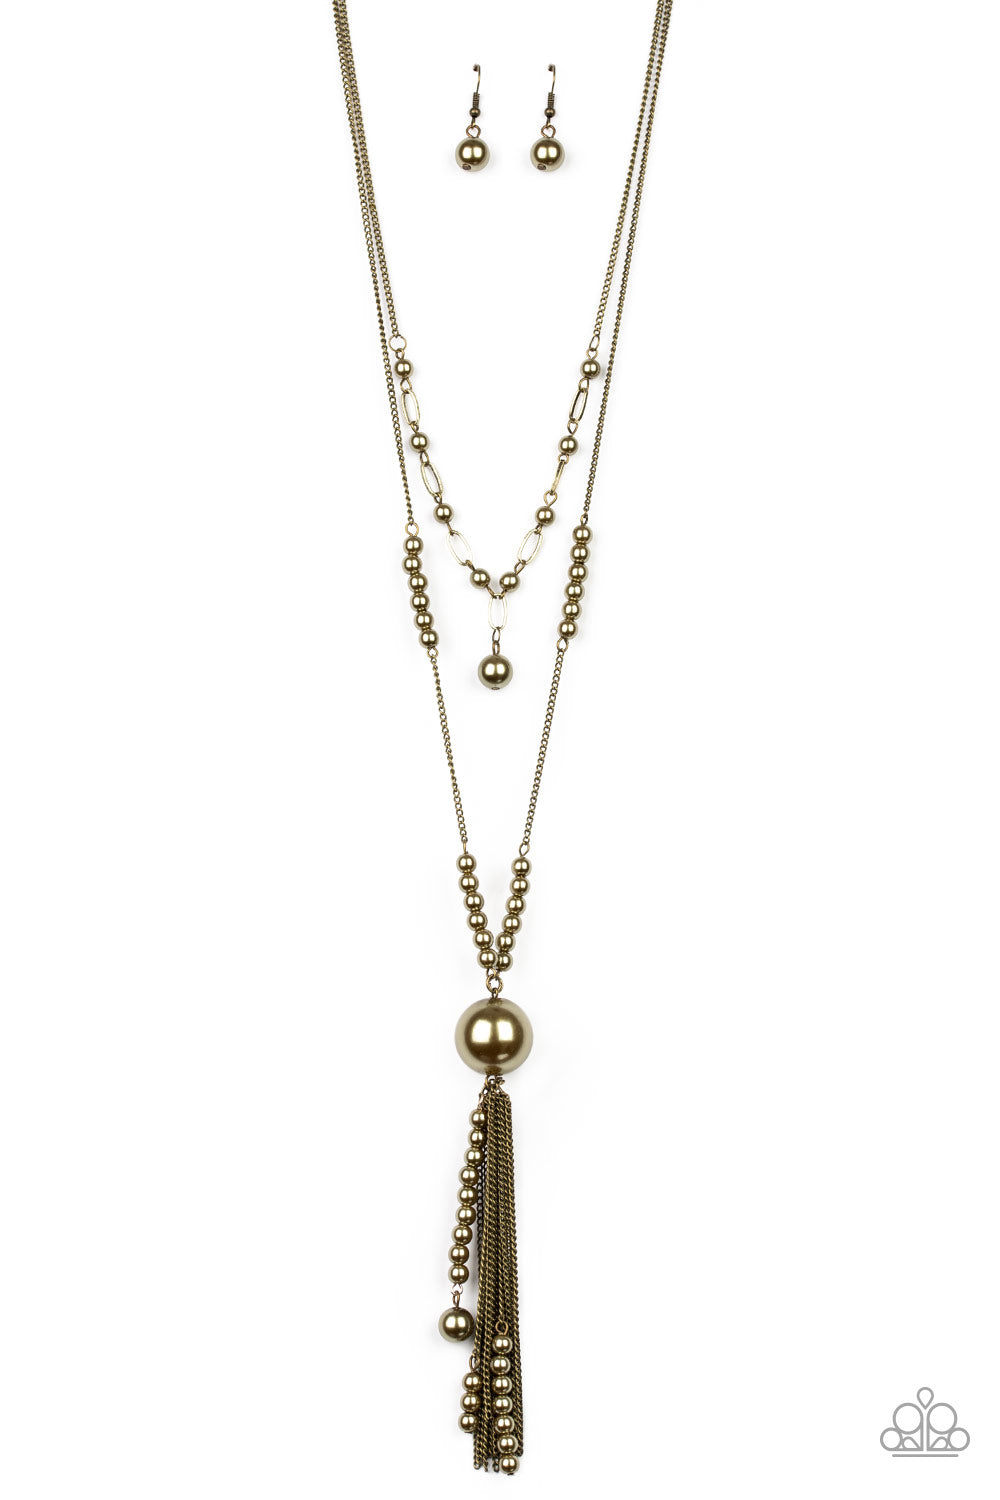 Paparazzi Accessories Abstract Elegance - Brass Necklaces a collision of brassy pearls and brass chains drape across the chest, creating elegantly mismatched layers. An oversized brass pearl swings from the bottom of the lowermost chain, giving way to a tassel of stacked brassy pearls and free-falling brass chains. Features an adjustable clasp closure.  Sold as one individual necklace. Includes one pair of matching earrings.